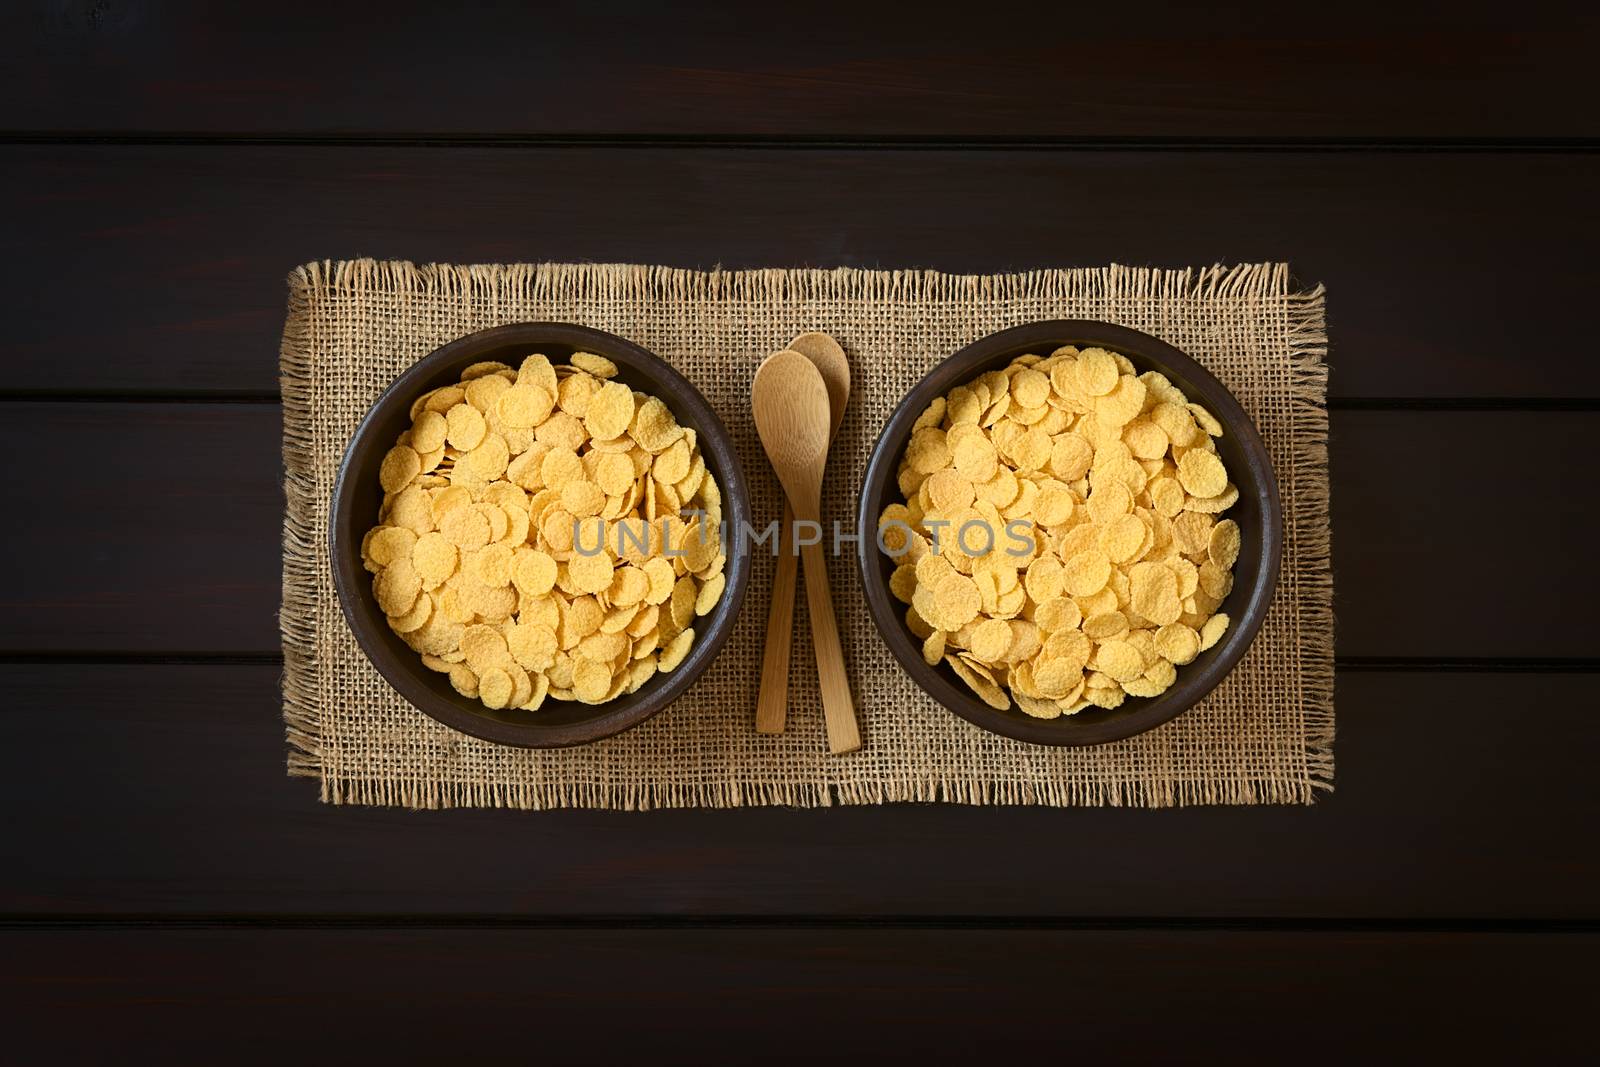 Crispy corn flakes breakfast cereal in rustic bowls with small wooden spoons, photographed overhead on dark wood with natural light